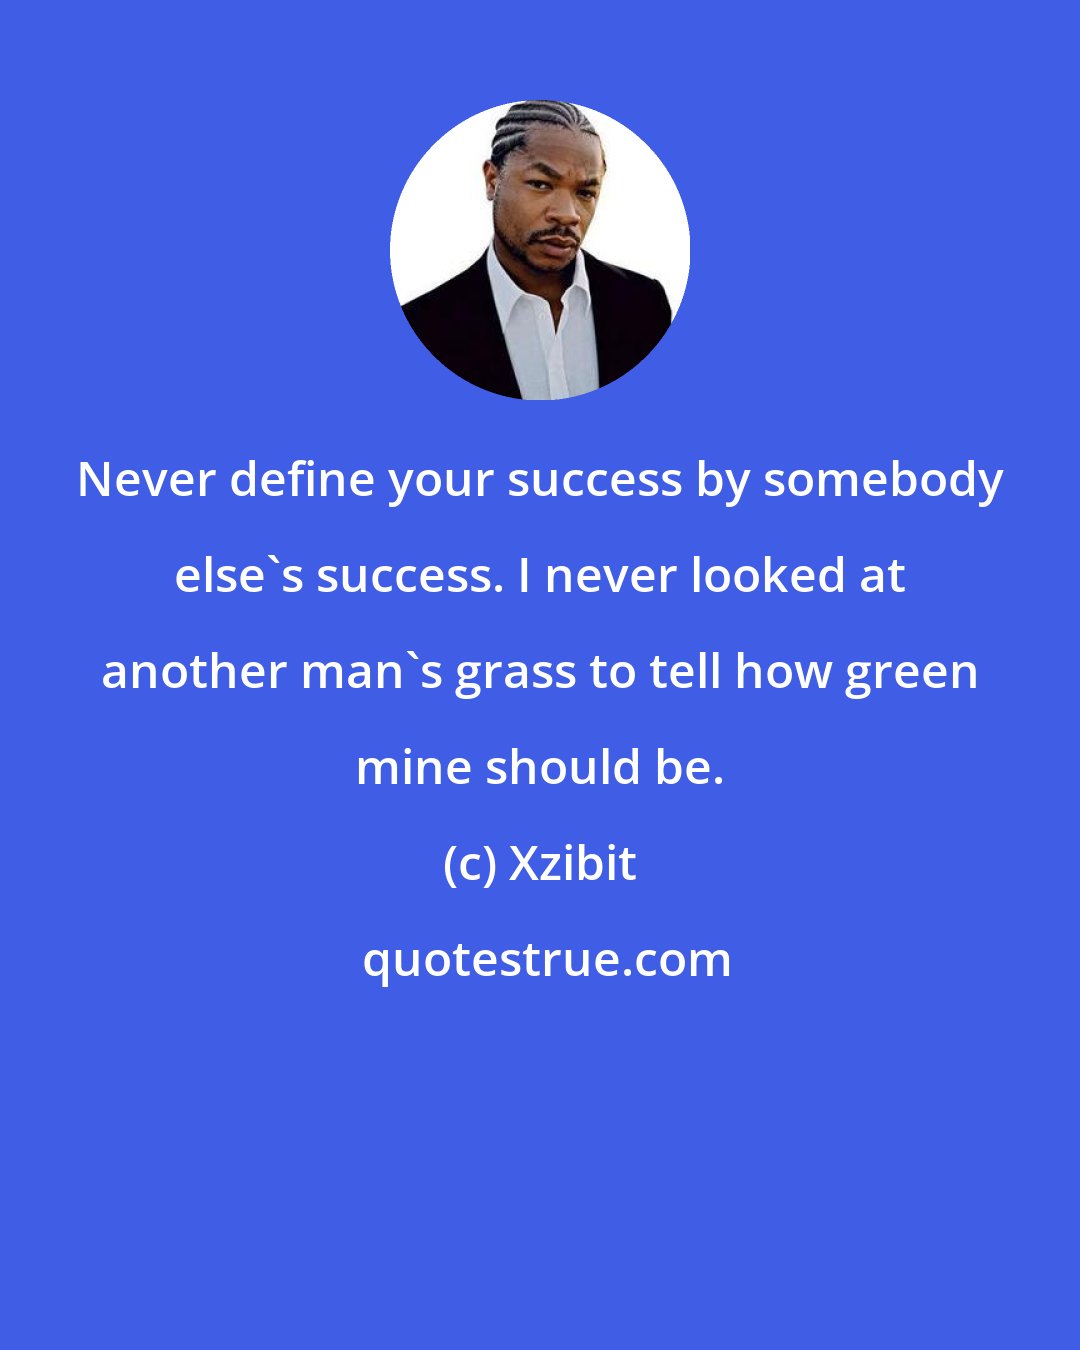 Xzibit: Never define your success by somebody else's success. I never looked at another man's grass to tell how green mine should be.